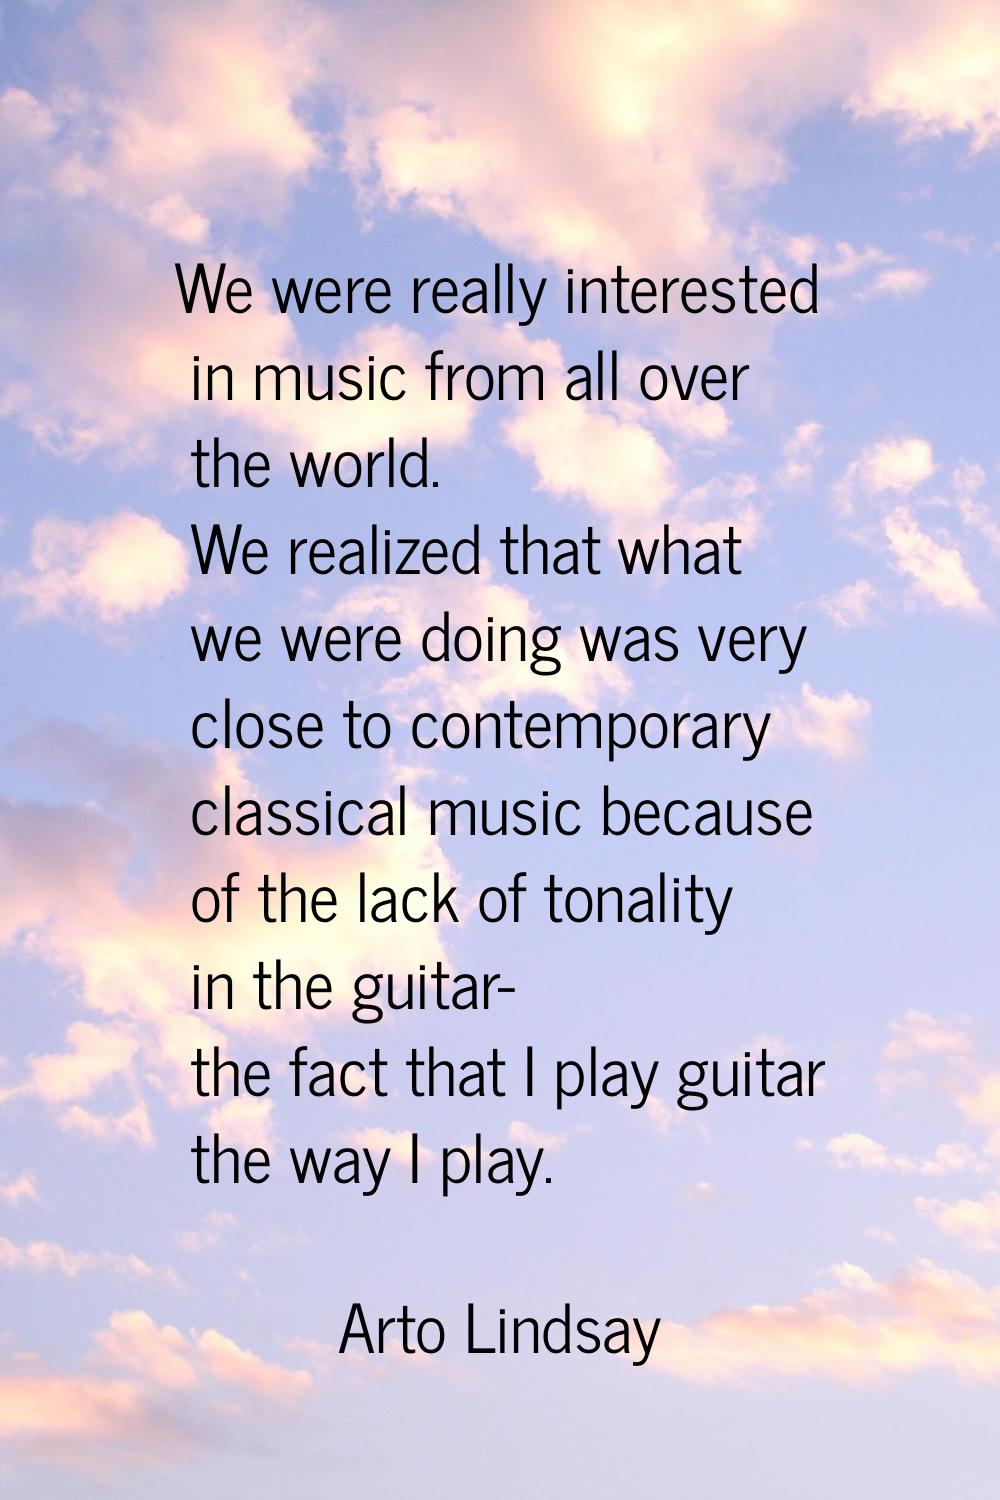 We were really interested in music from all over the world. We realized that what we were doing was